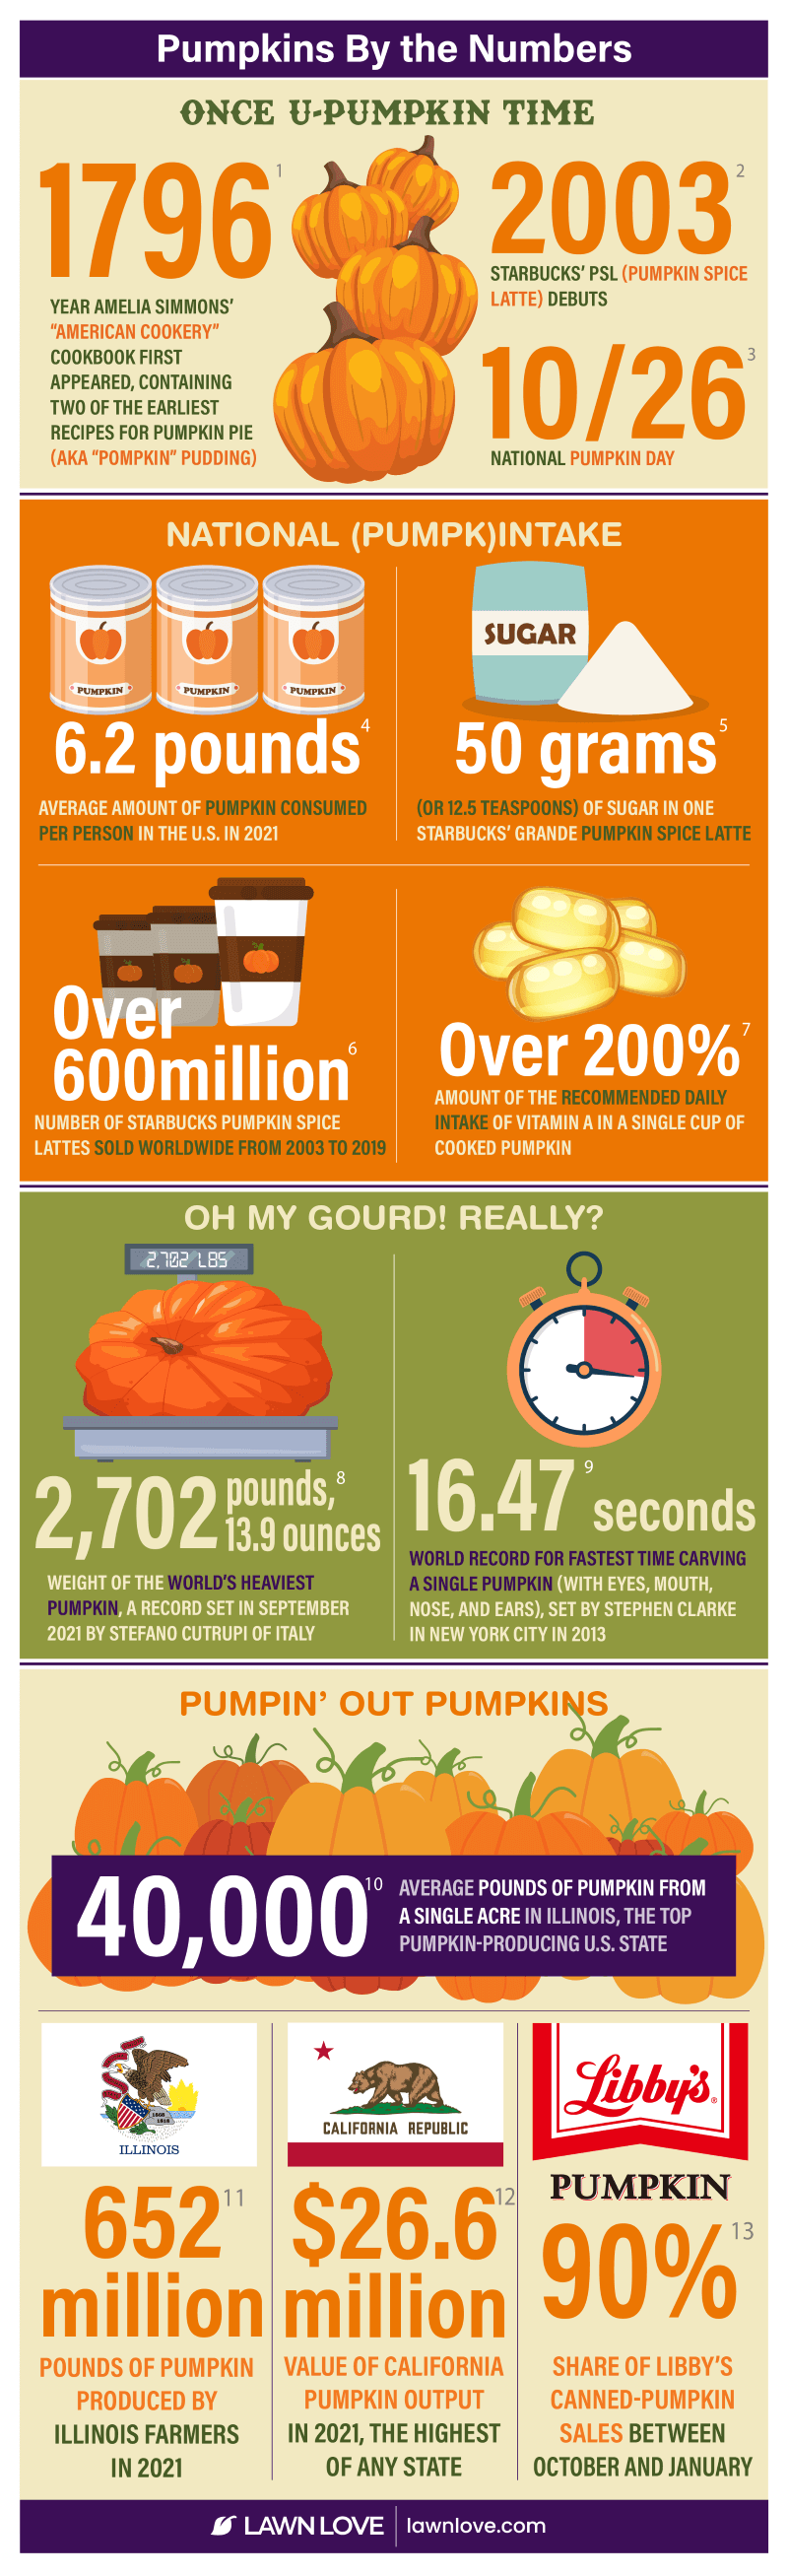 Infographic showing the various pumpkin-related stats about pumpkin history, U.S. consumption, state pumpkin production, and more